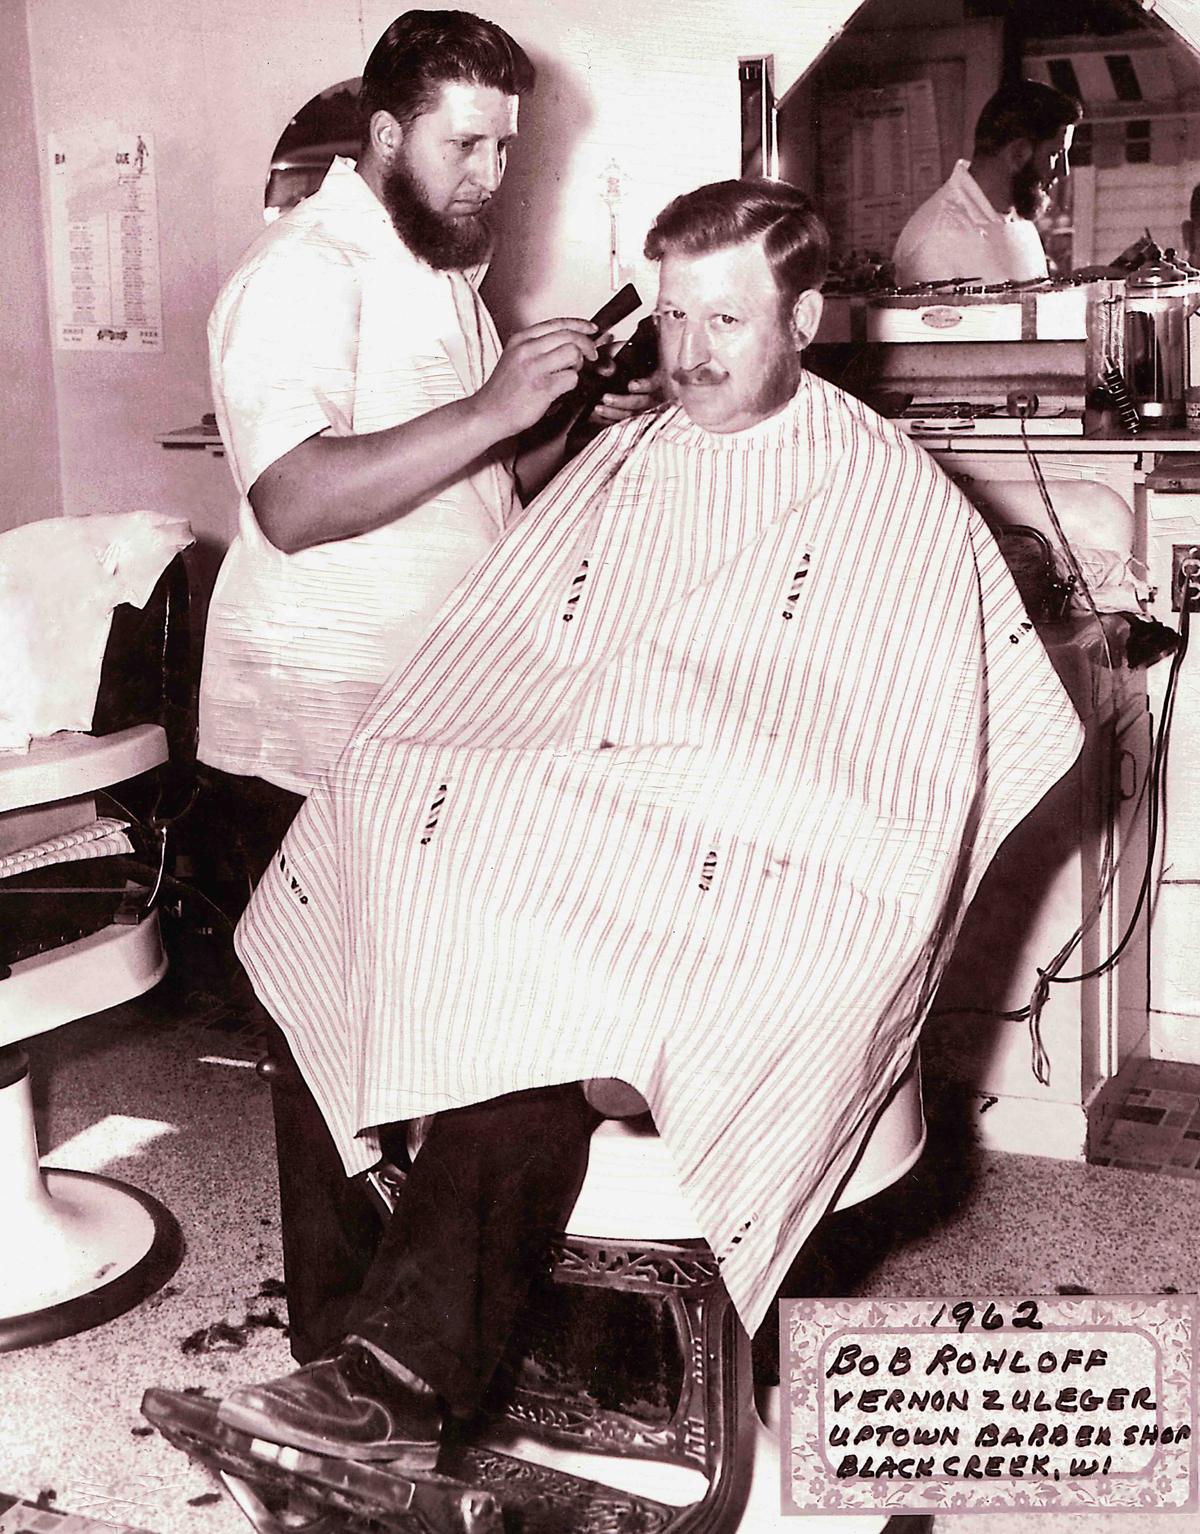 Mr. Rohloff barbering in the early 1960s. (Courtesy of Mark Karweick)